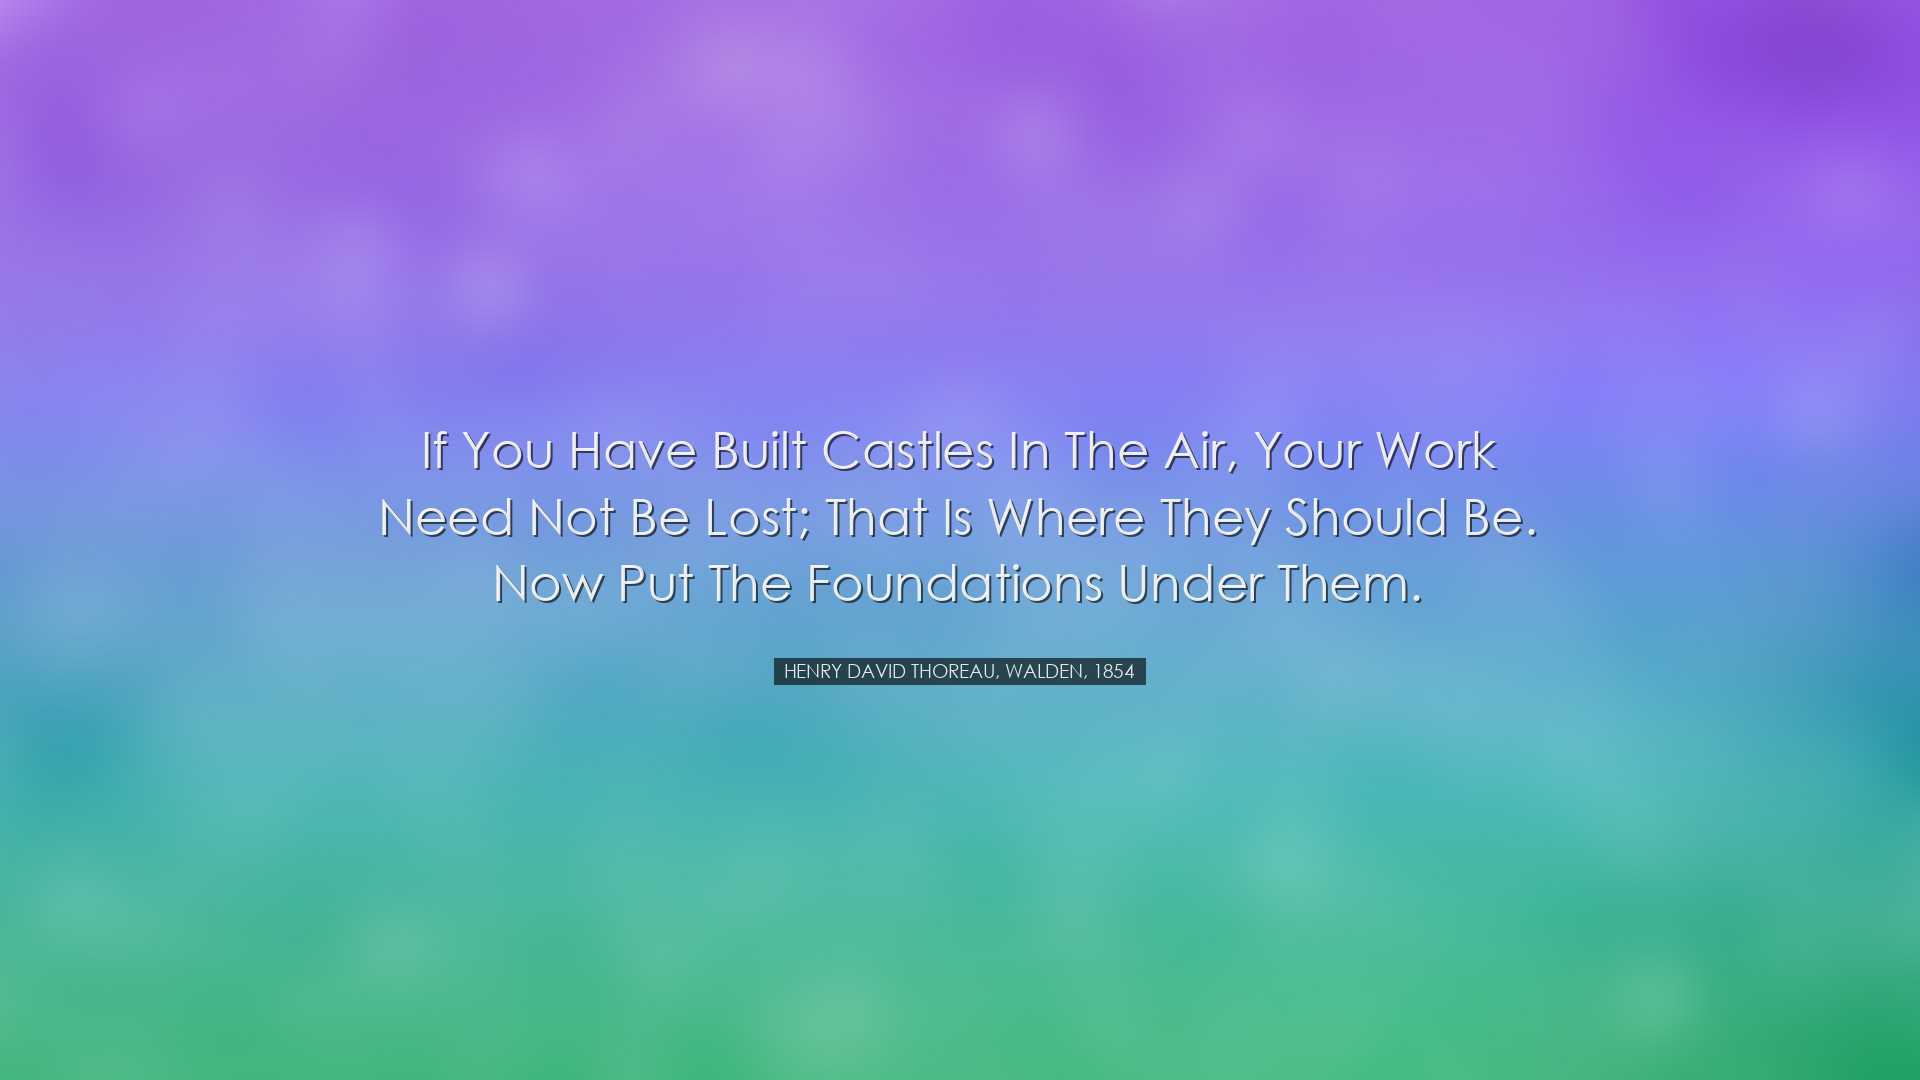 If you have built castles in the air, your work need not be lost;